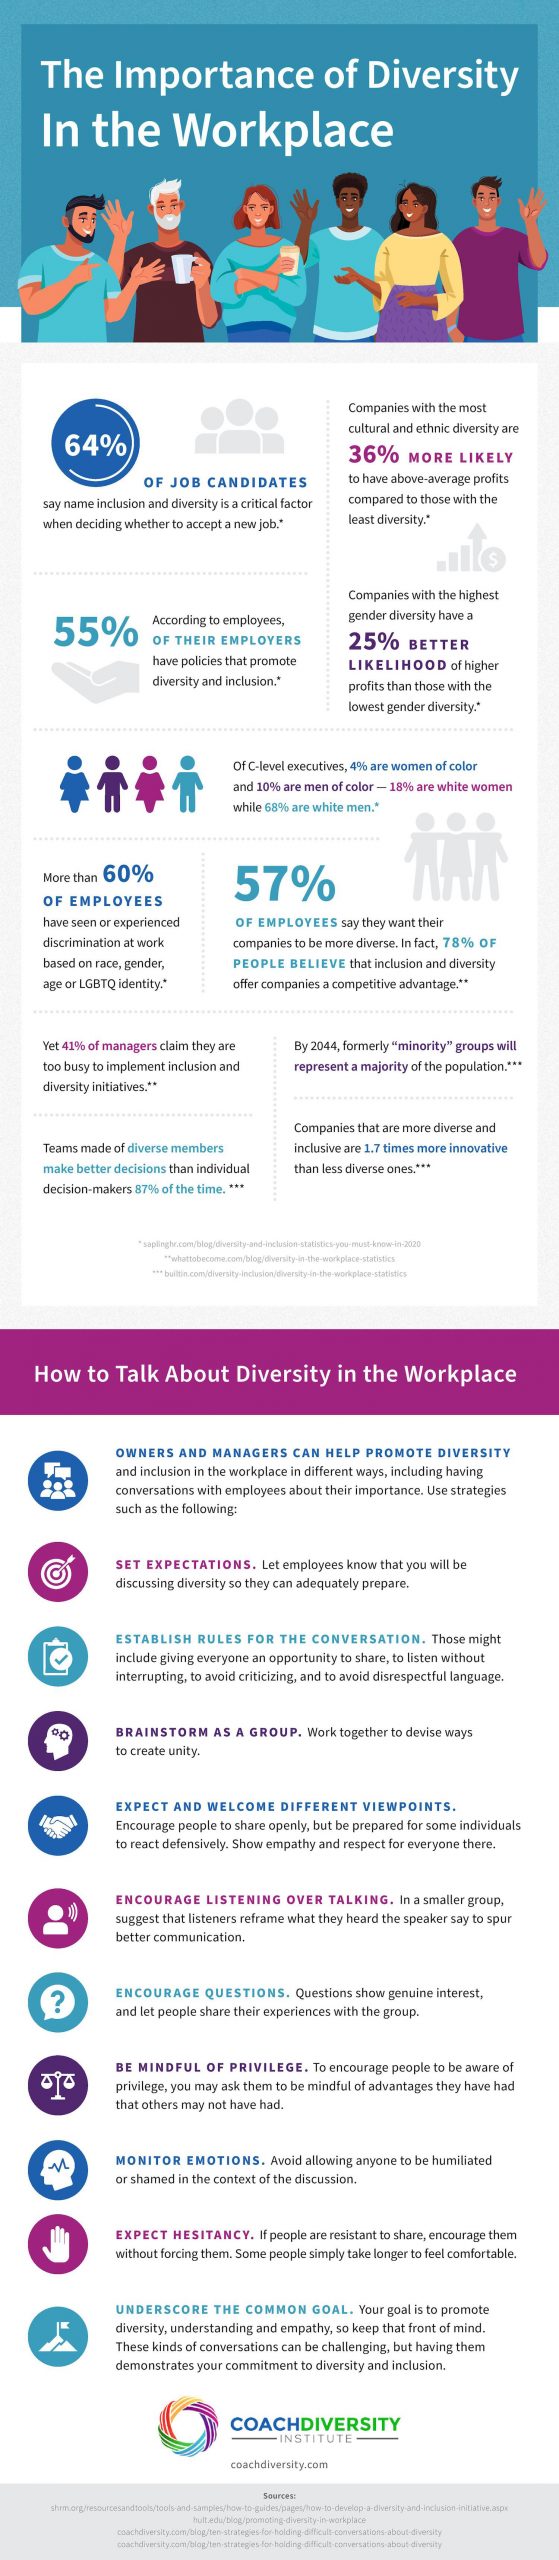 coach diversity diversity in the workplace infographic